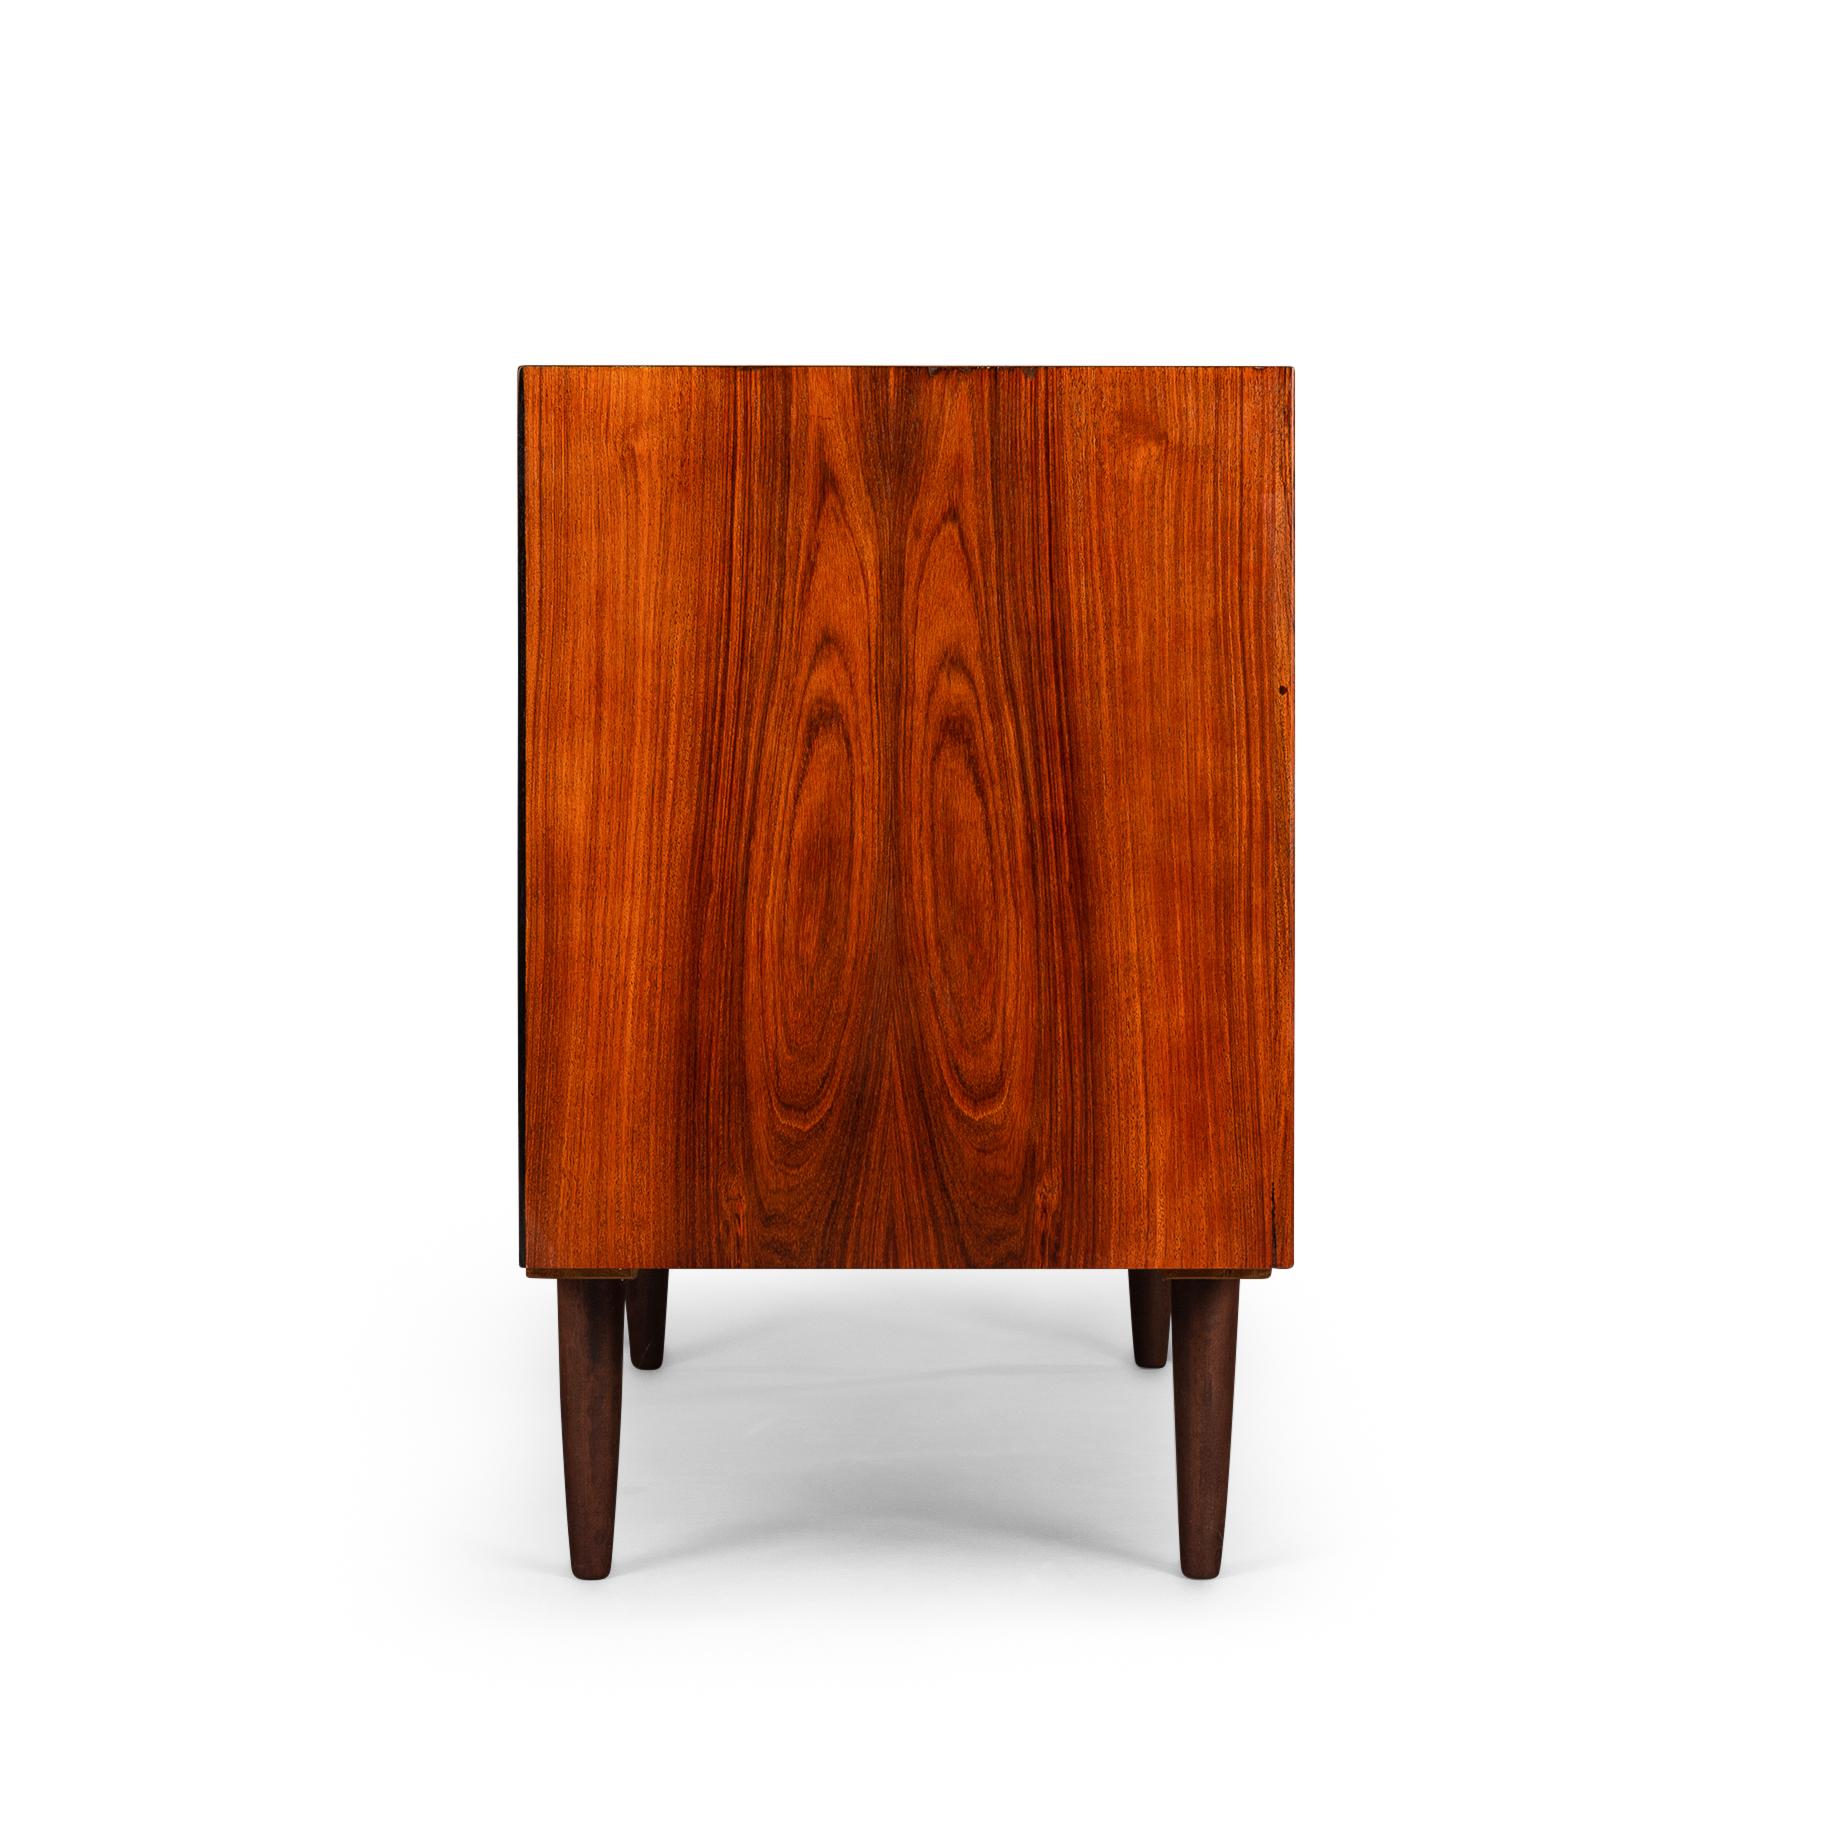 Rosewood anybody?! This medium sized sideboard is all about the print and colour of the rosewood veneer. Very much an eye catcher in any modern and light interior. It has the design signature of Brouer all over it with it's top veneer in dark red